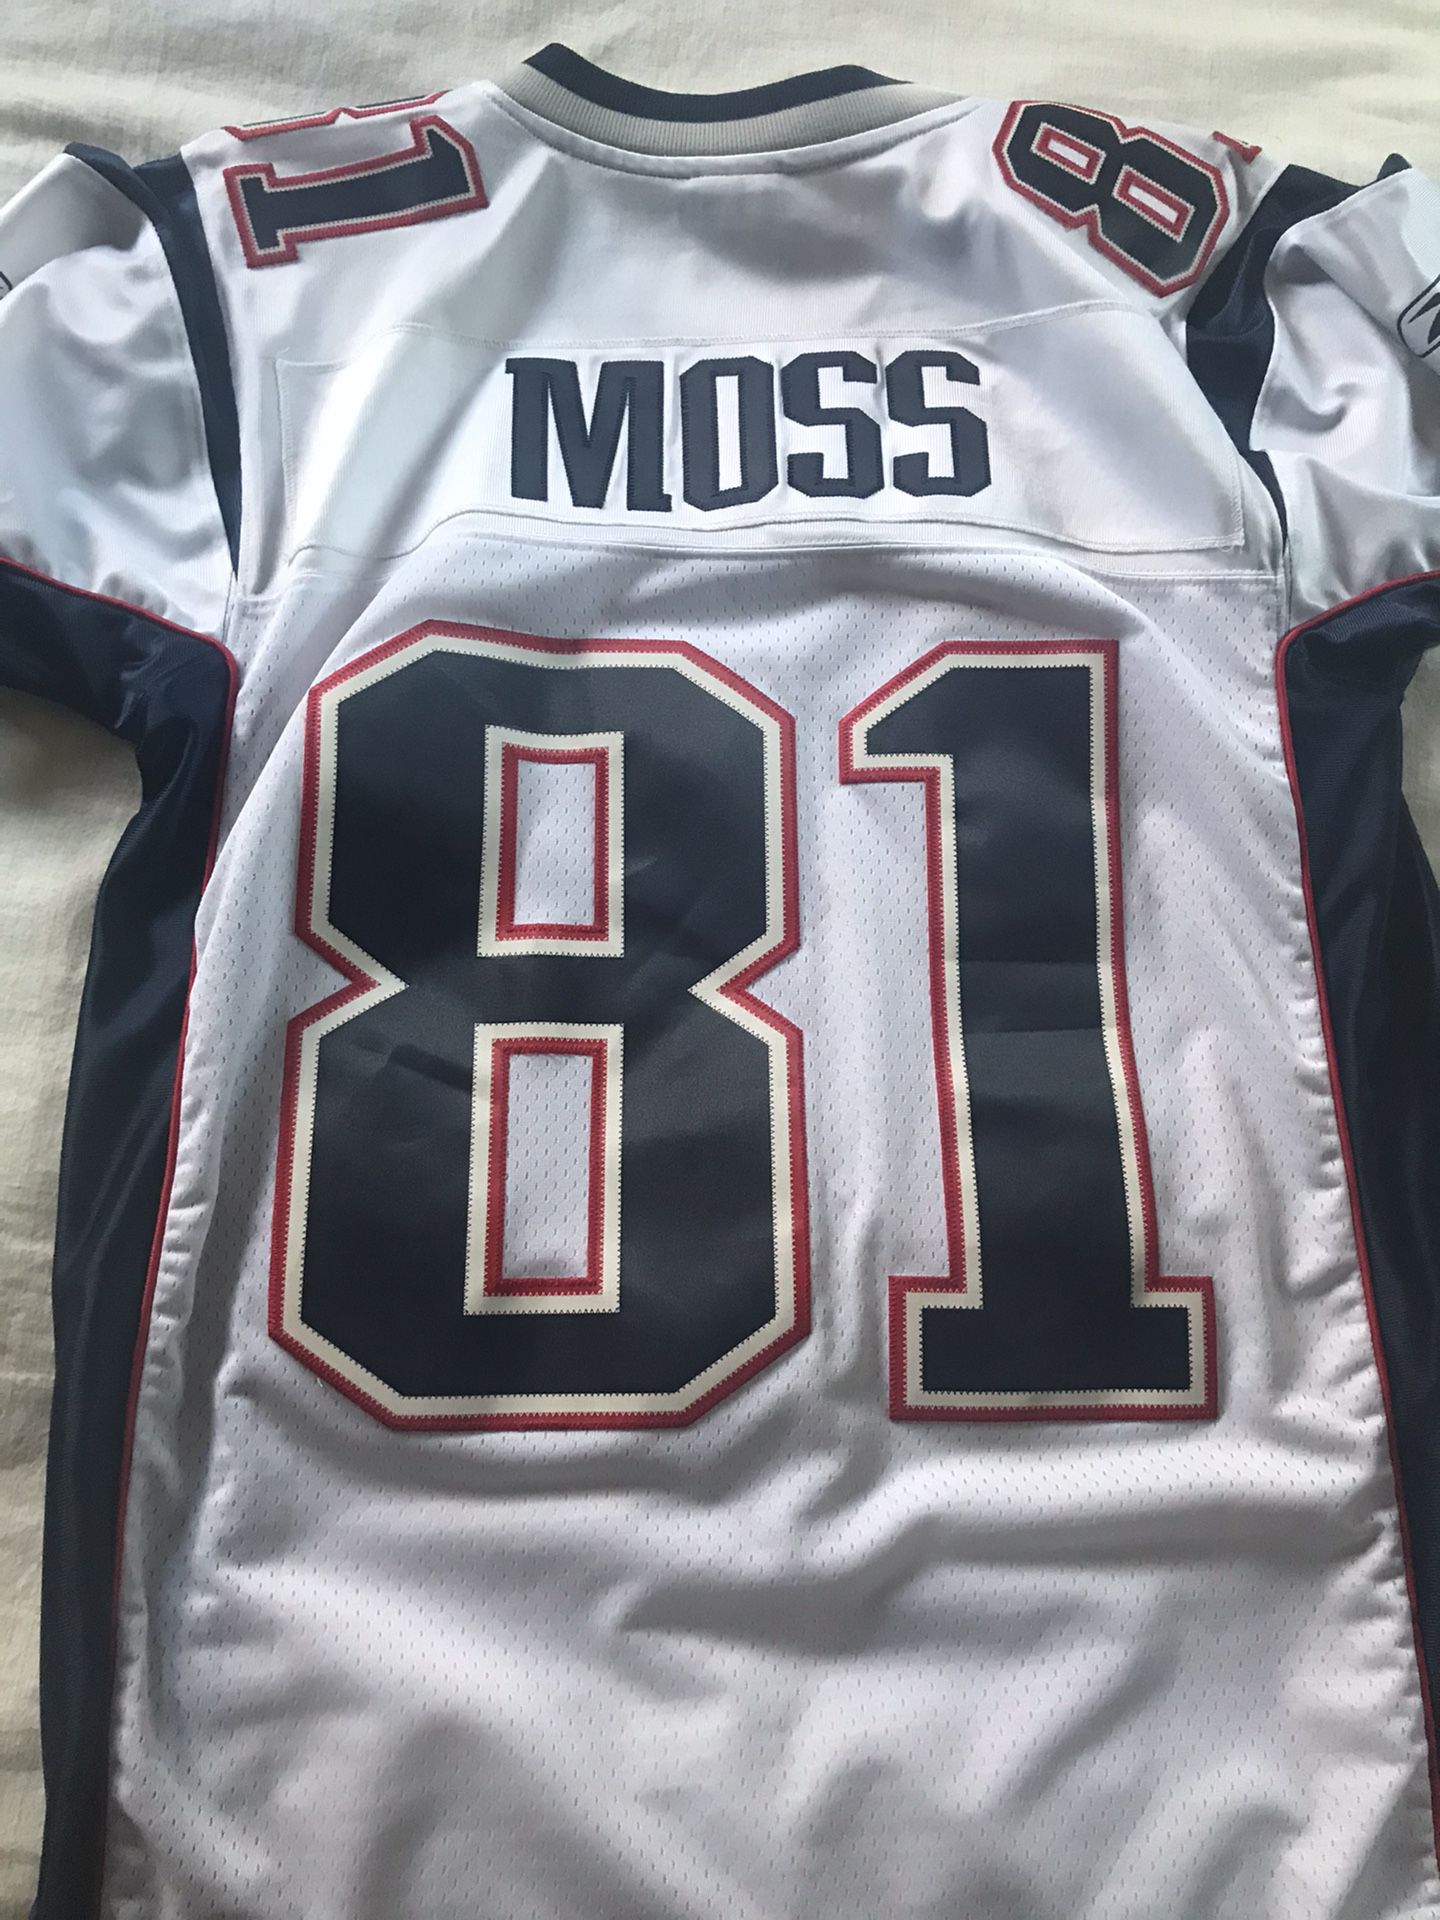 Men’s Randy Moss New England Patriots Jersey (Sewn numbers and name)